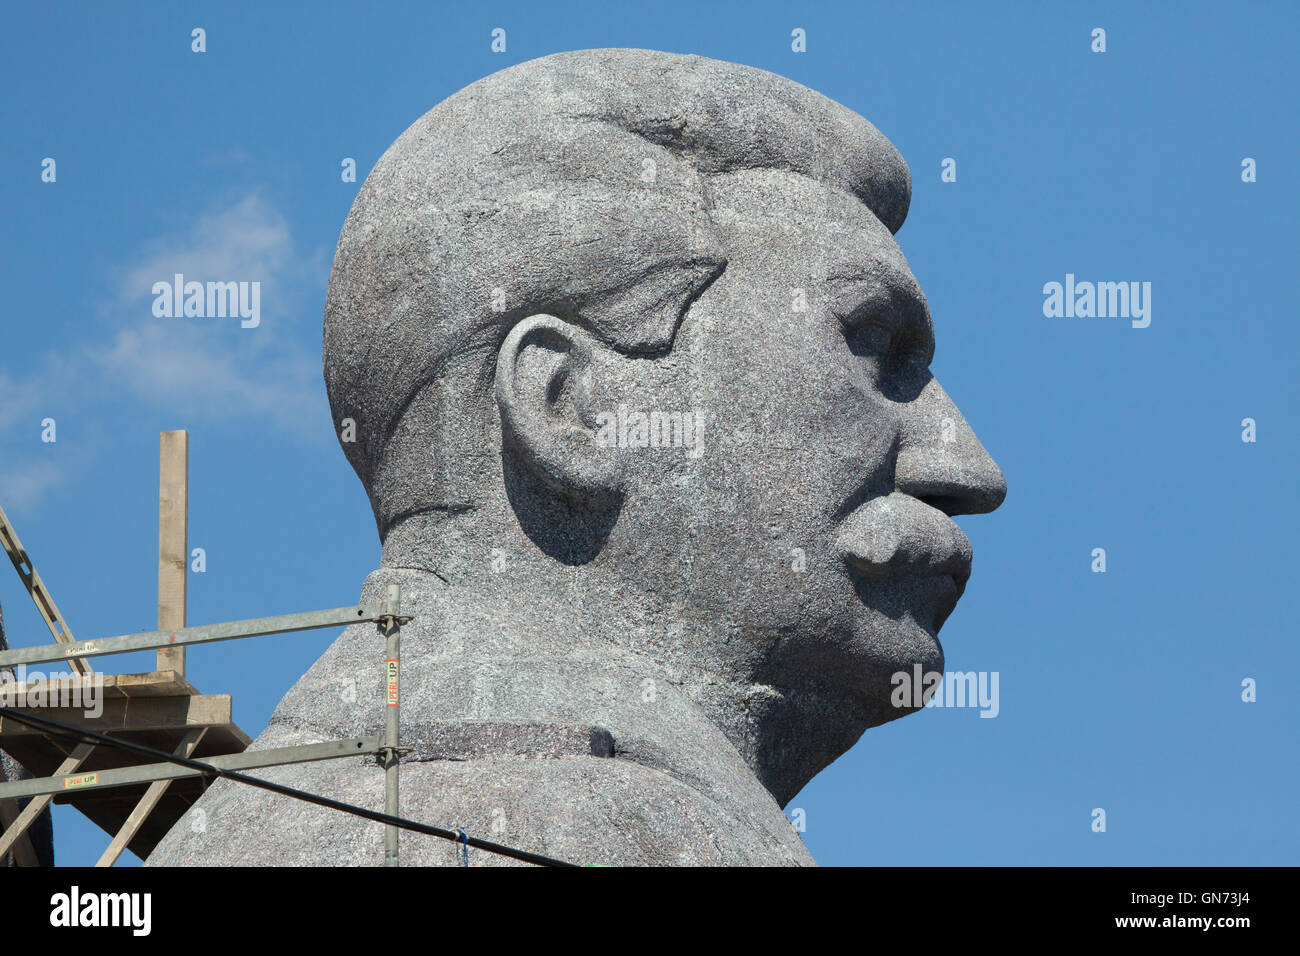 Huge head of Soviet dictator Joseph Stalin rising over Letna Park in Prague, Czech Republic, during the Czech Television filming Stock Photo